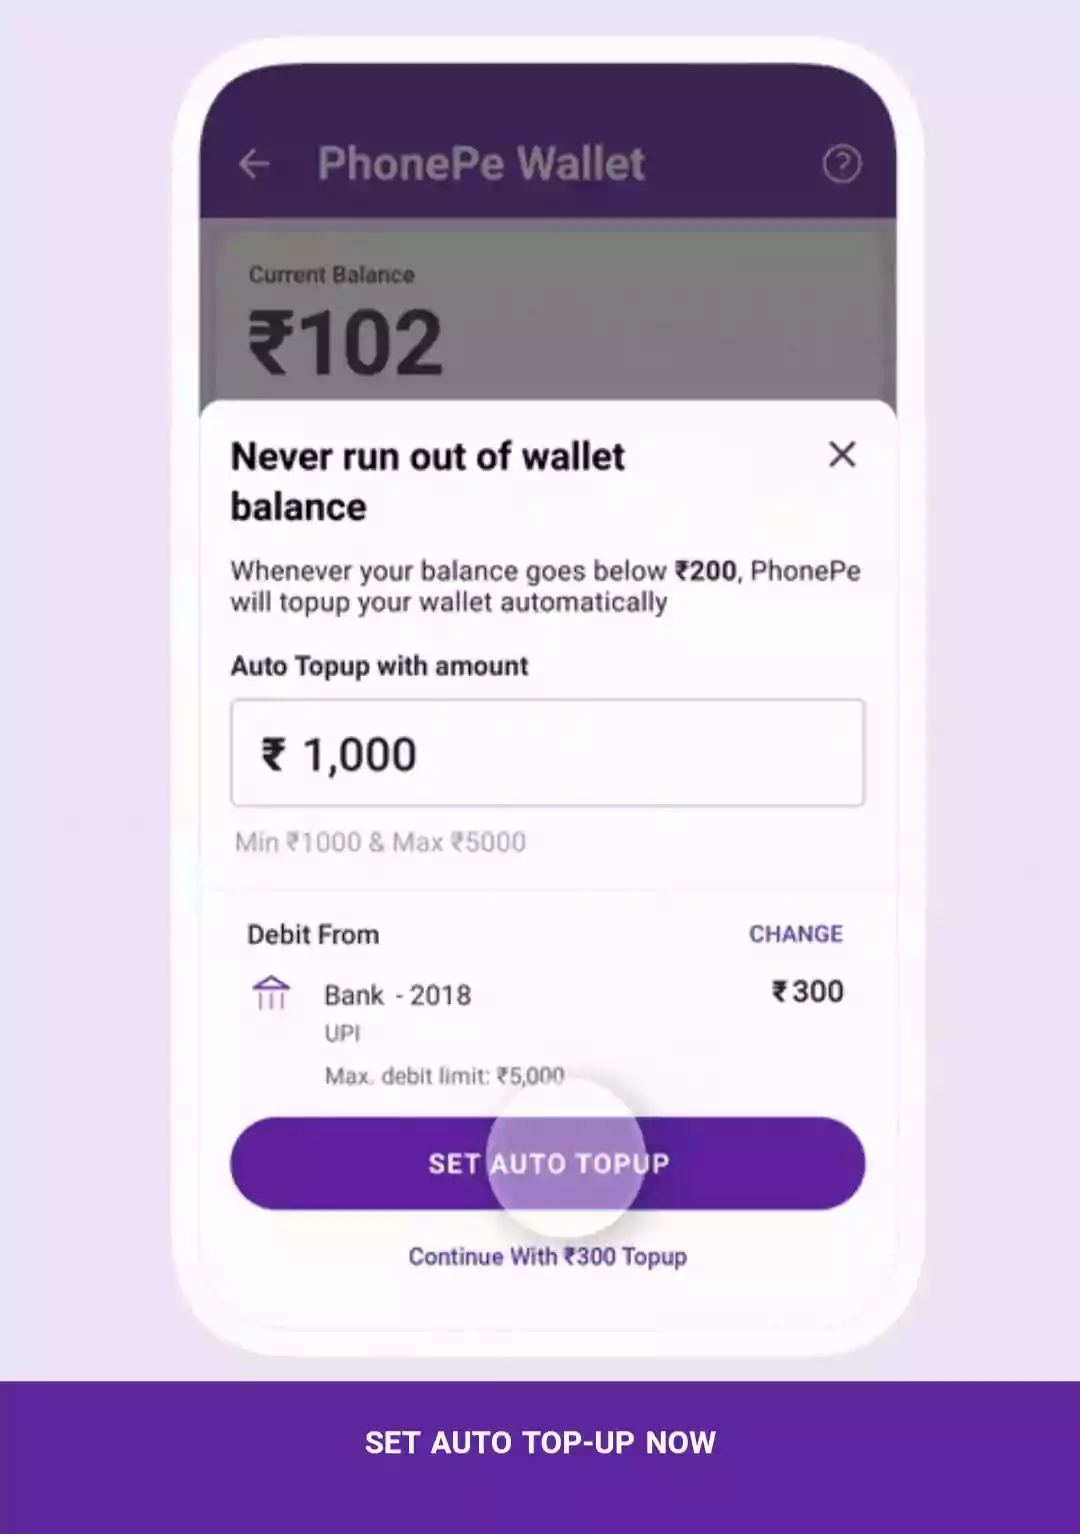 PhonePe Step Up Auto Top-Up